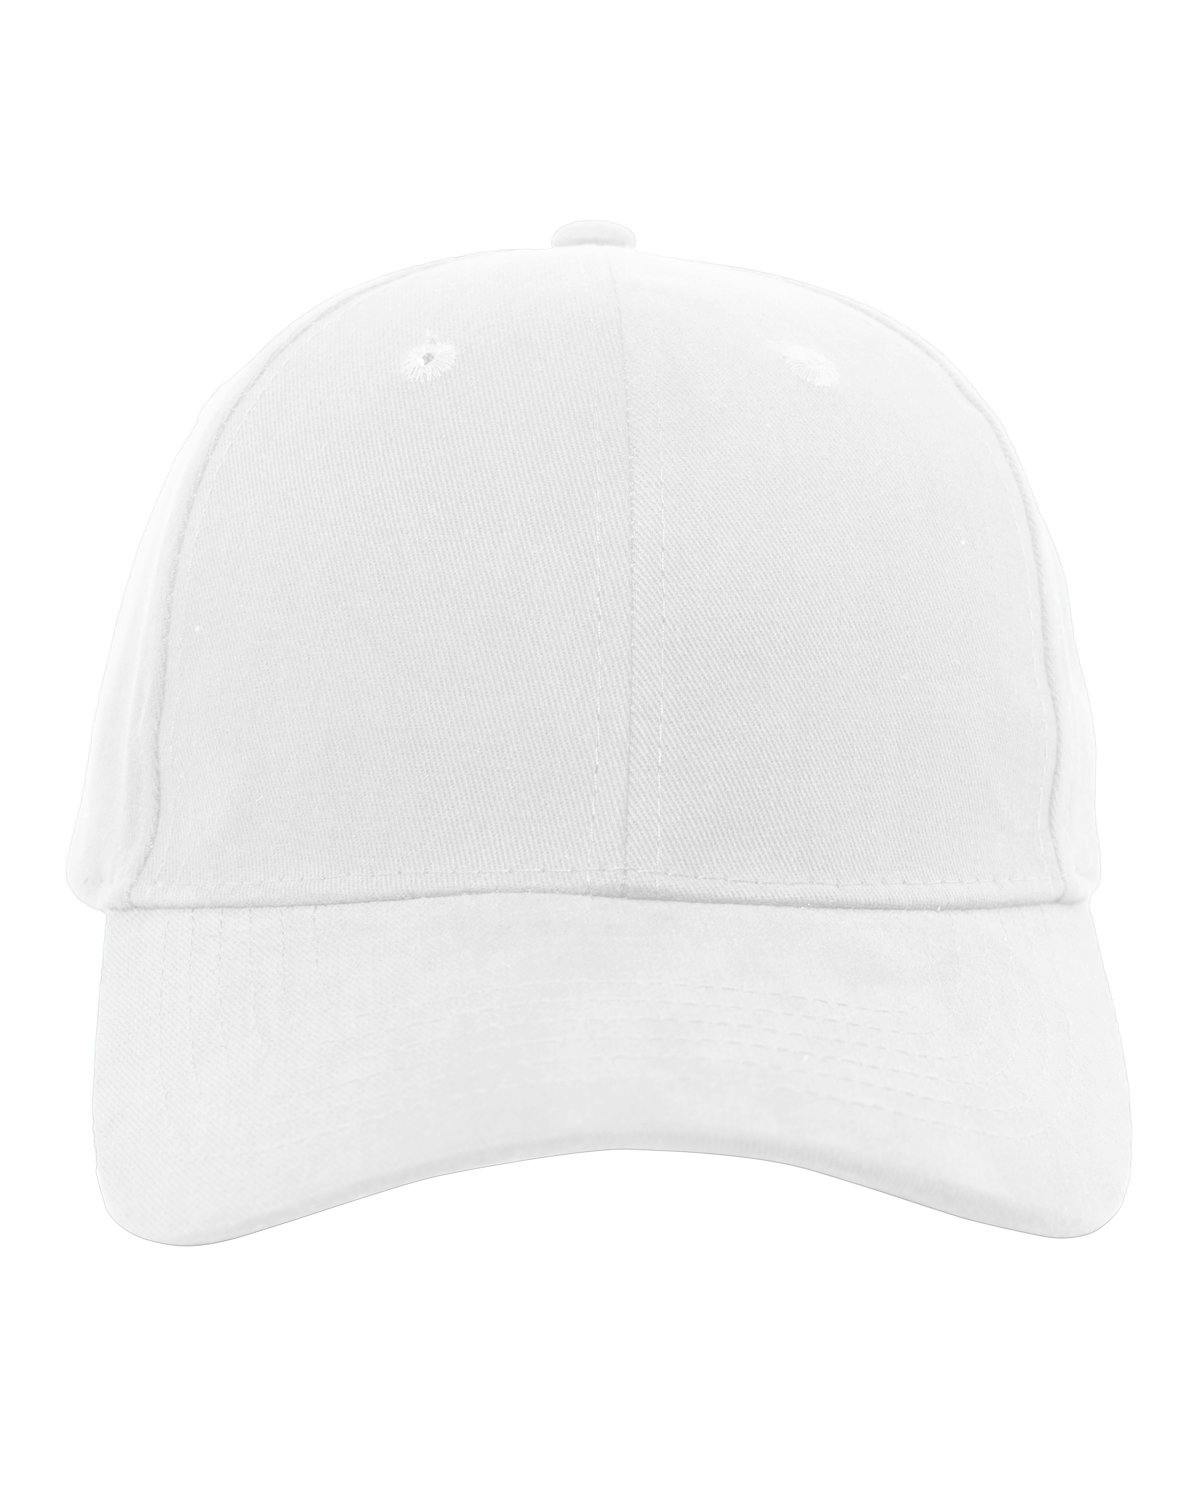 Image for Brushed Cotton Twill Adjustable Cap